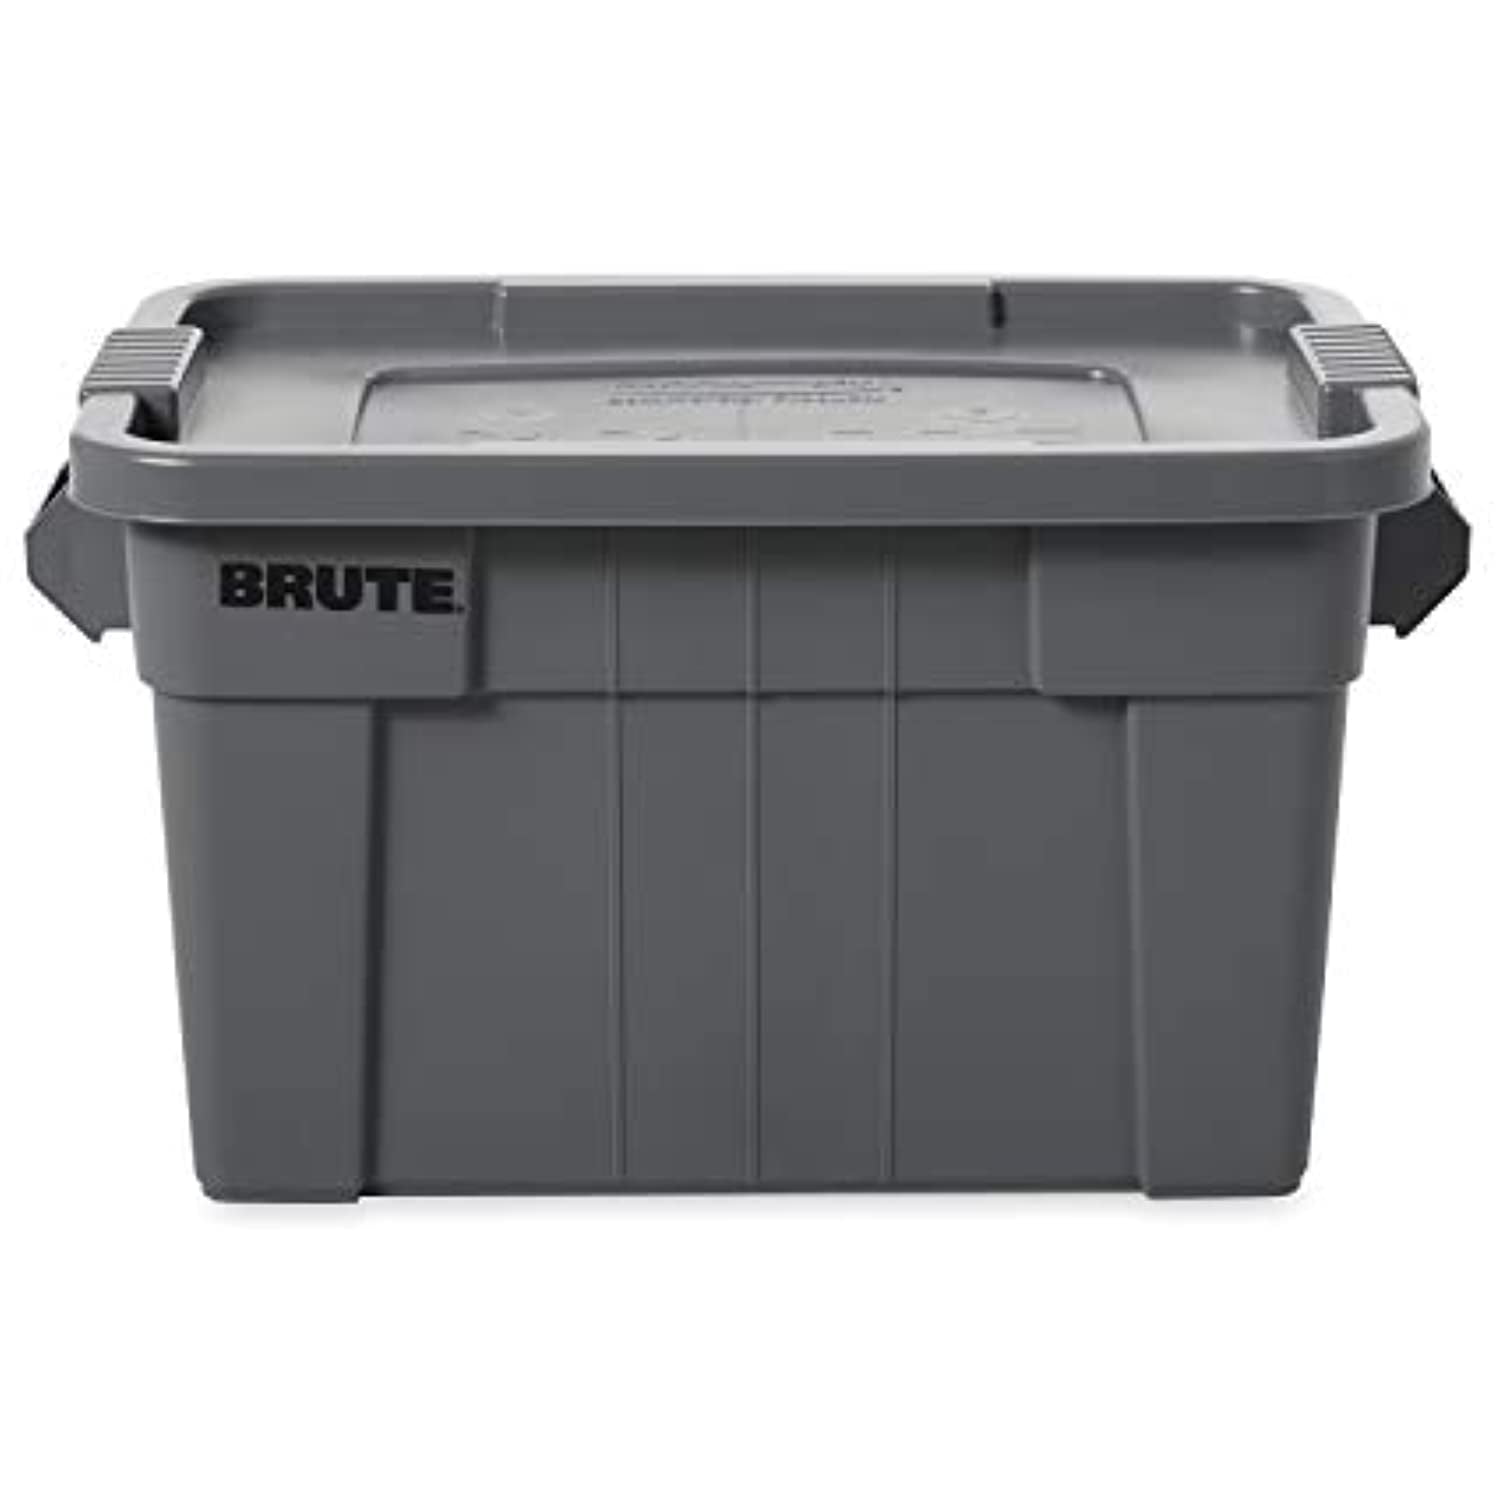  Rubbermaid Commercial Products Brute Tote Storage Container  with Lid-Included, 20-Gallon, Dark Green, Rugged/Reusable Boxes for  Moving/Camping/Storing in Garage/Basement/Attic/Jobsite/Truck : Home &  Kitchen